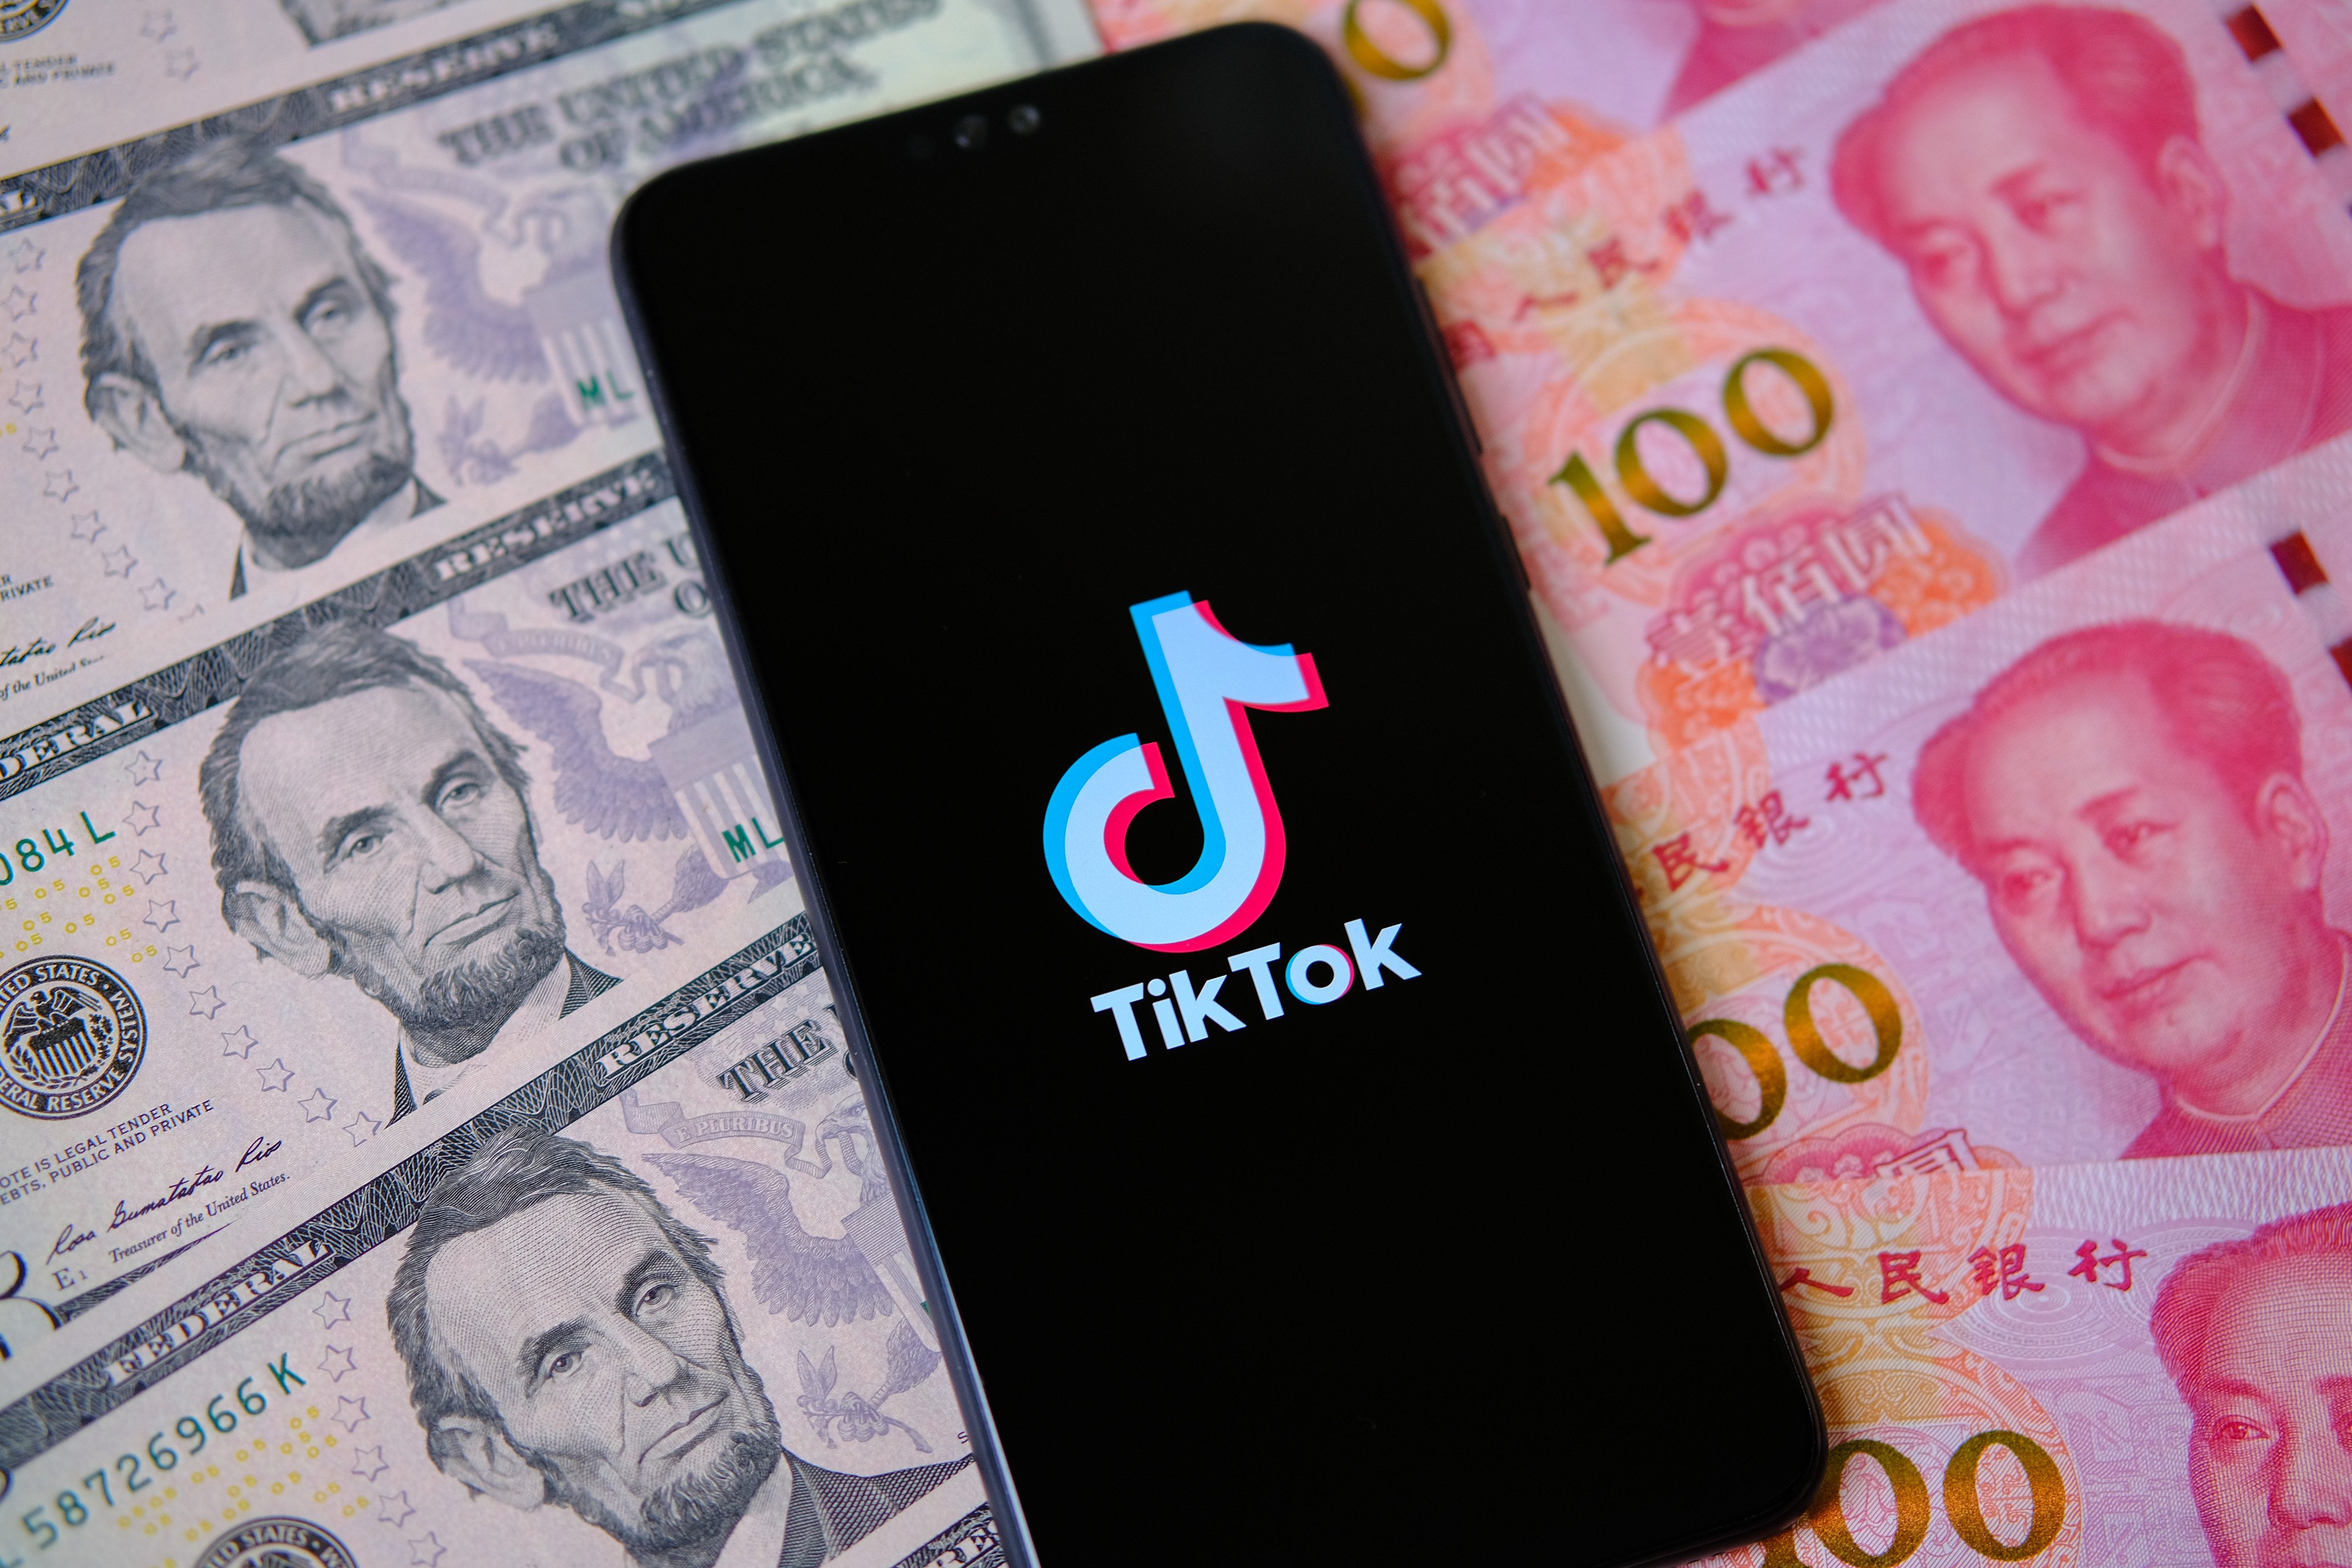 A potential US ban on the Chinese-owned TikTok app could be averted if it is sold to an American owner. But chances are slim, for business and political reasons. Photo: Shutterstock